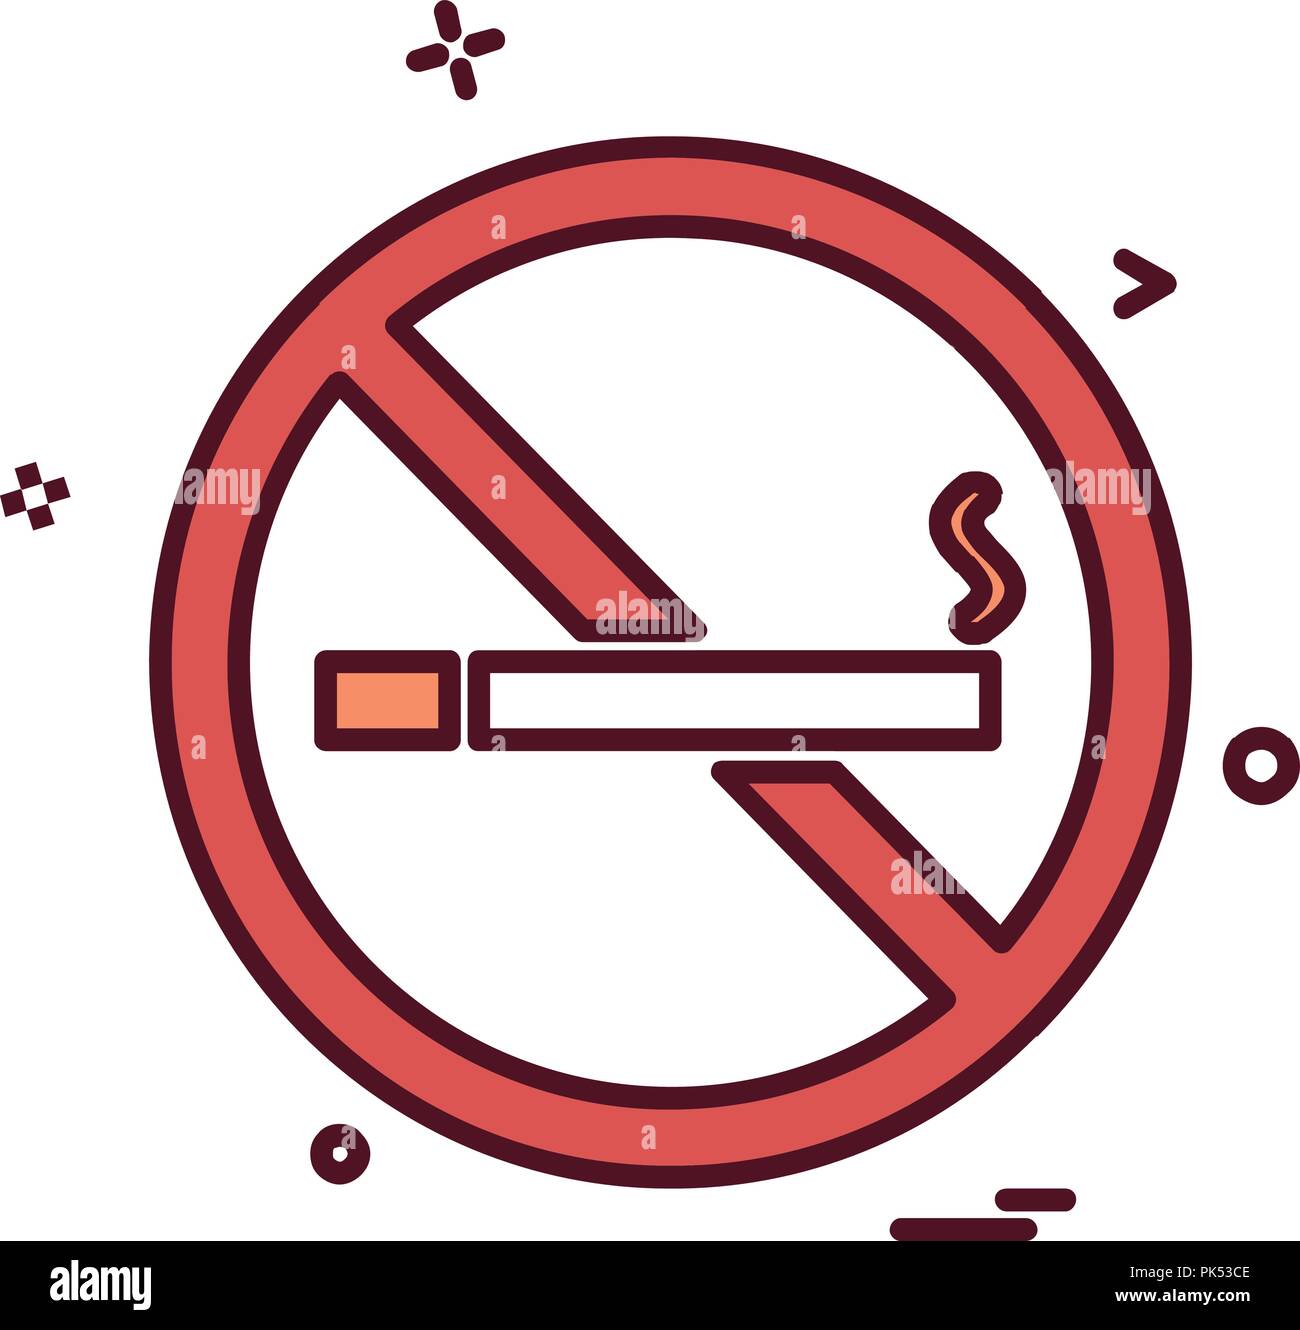 no smoking poster drawing || how to draw no tobacco day poster drawing ||  say no to smoking drawing - YouTube